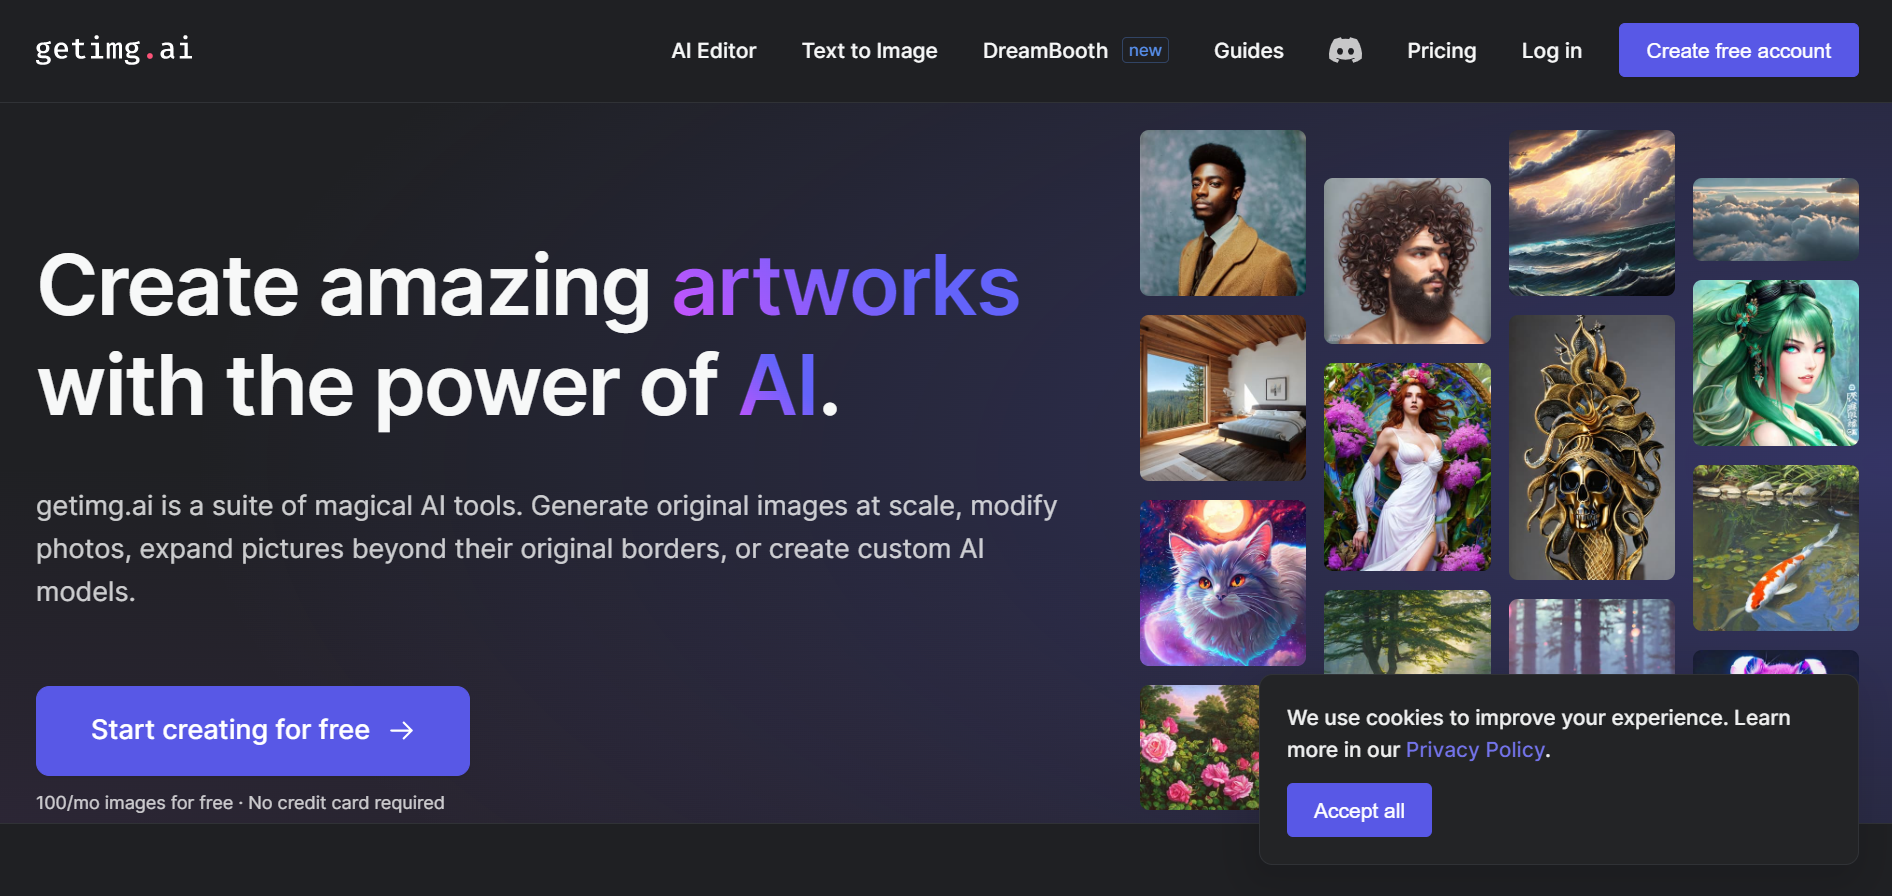 Getimg.ai: The Ultimate Solution for Effortless Image Editing